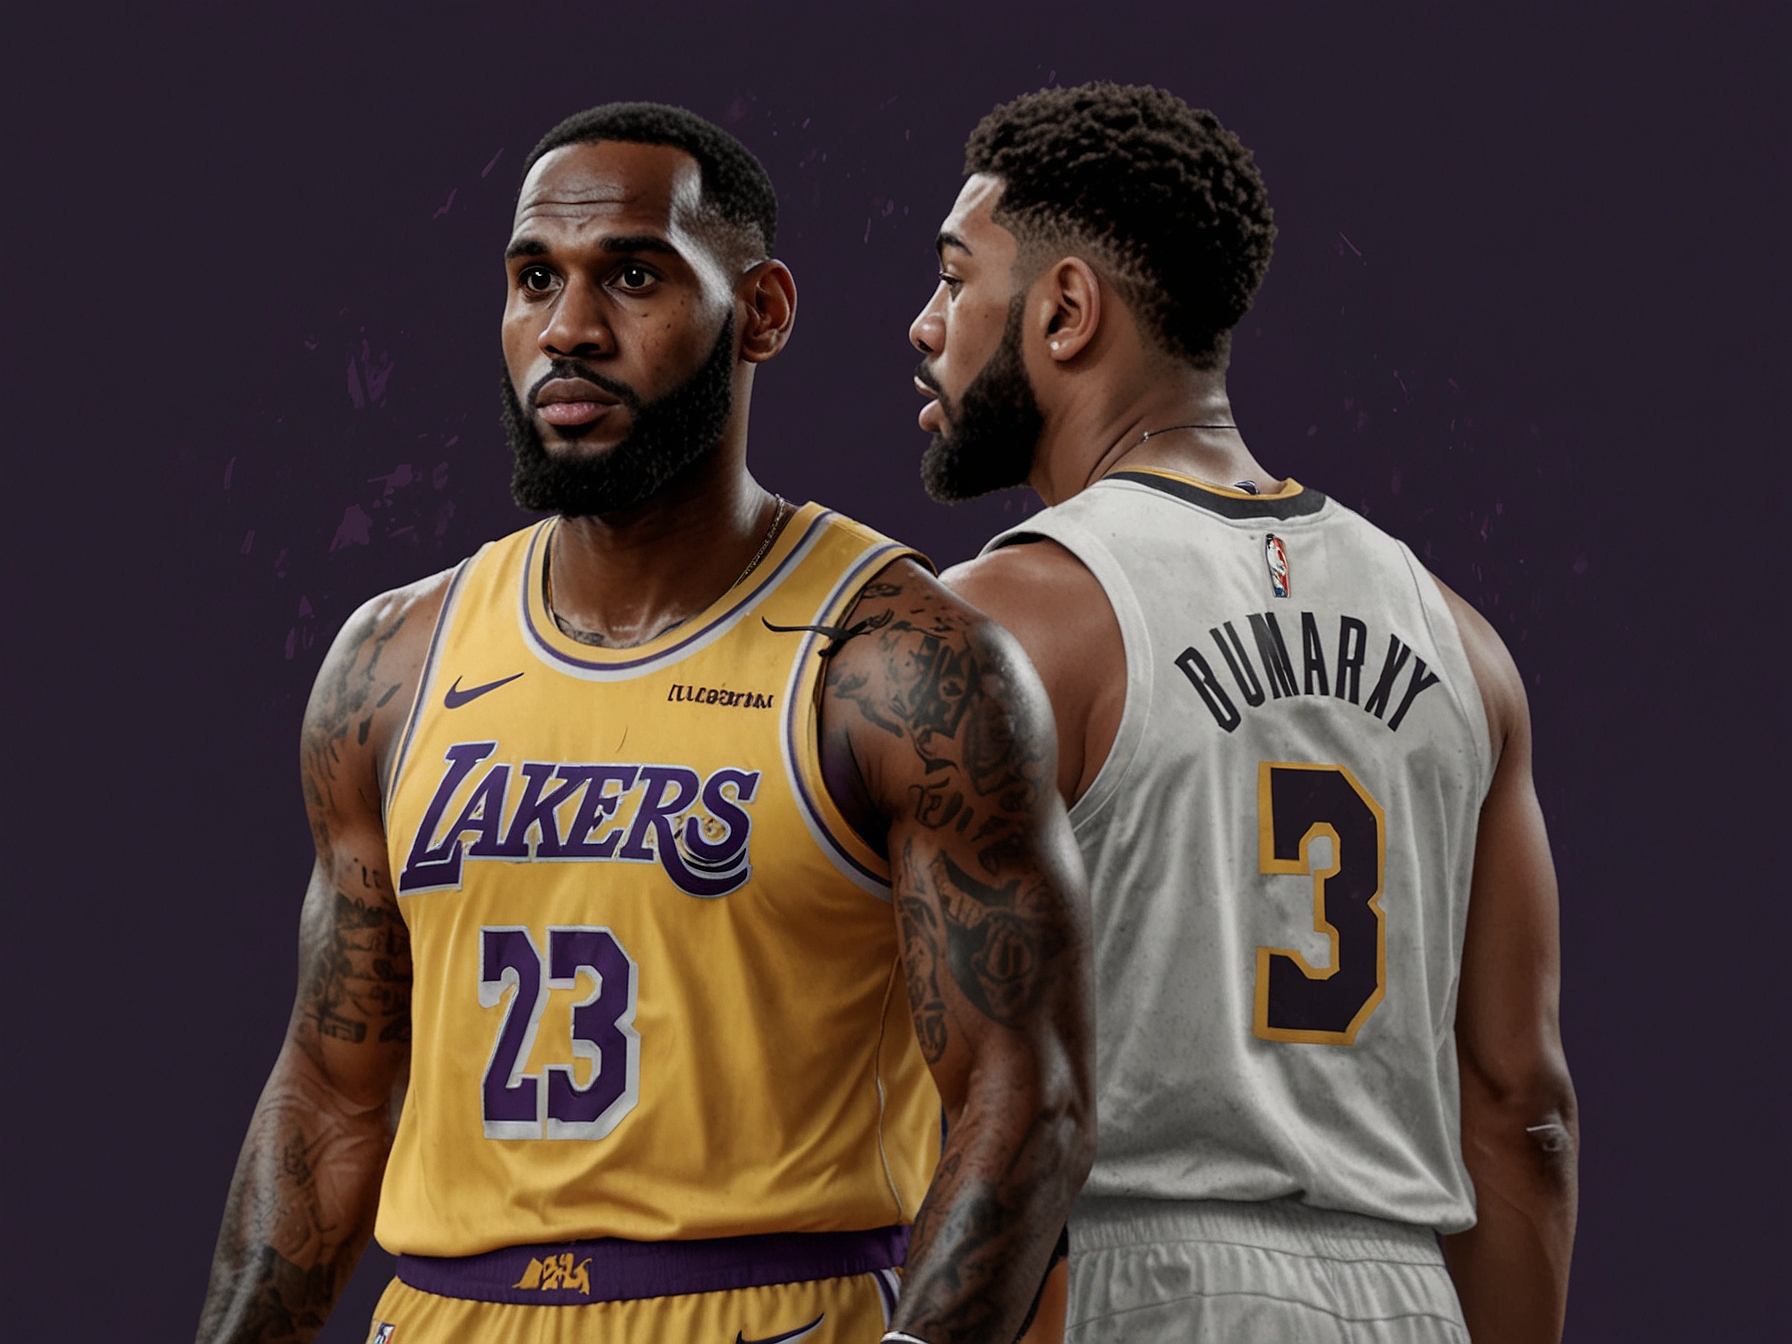 Image showing LeBron James and Anthony Davis in Lakers uniforms, with a ghosted figure of Dejounte Murray between them, highlighting the potential for Murray to join the Lakers.